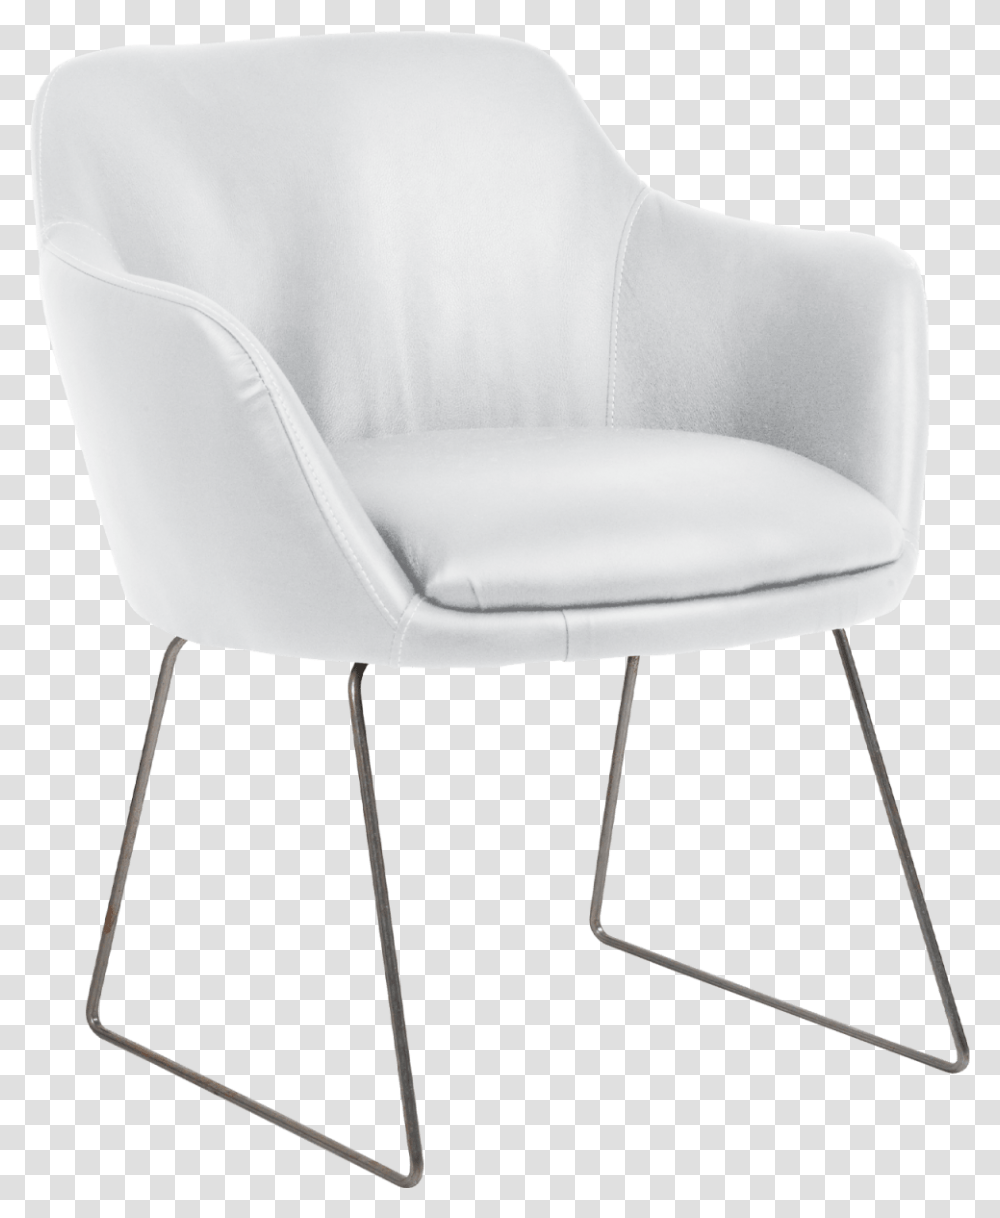 Windsor Chair Steel Skid Legs Vinyl Seat Hire For Events, Furniture, Armchair Transparent Png